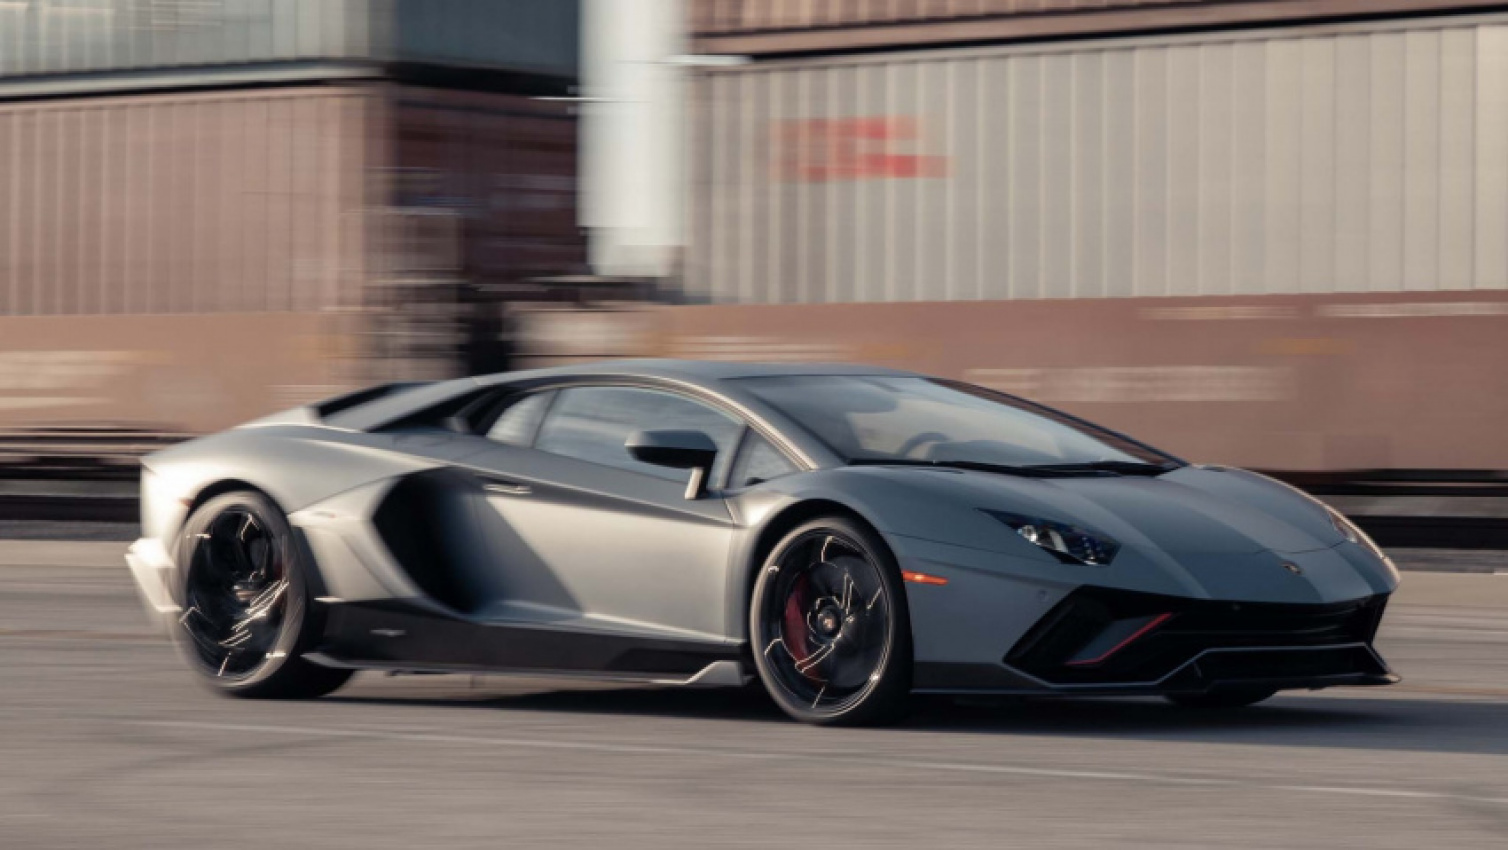 2022 Lamborghini Aventador LP 780-4 Ultimae First Drive Review: A Farewell to Arms